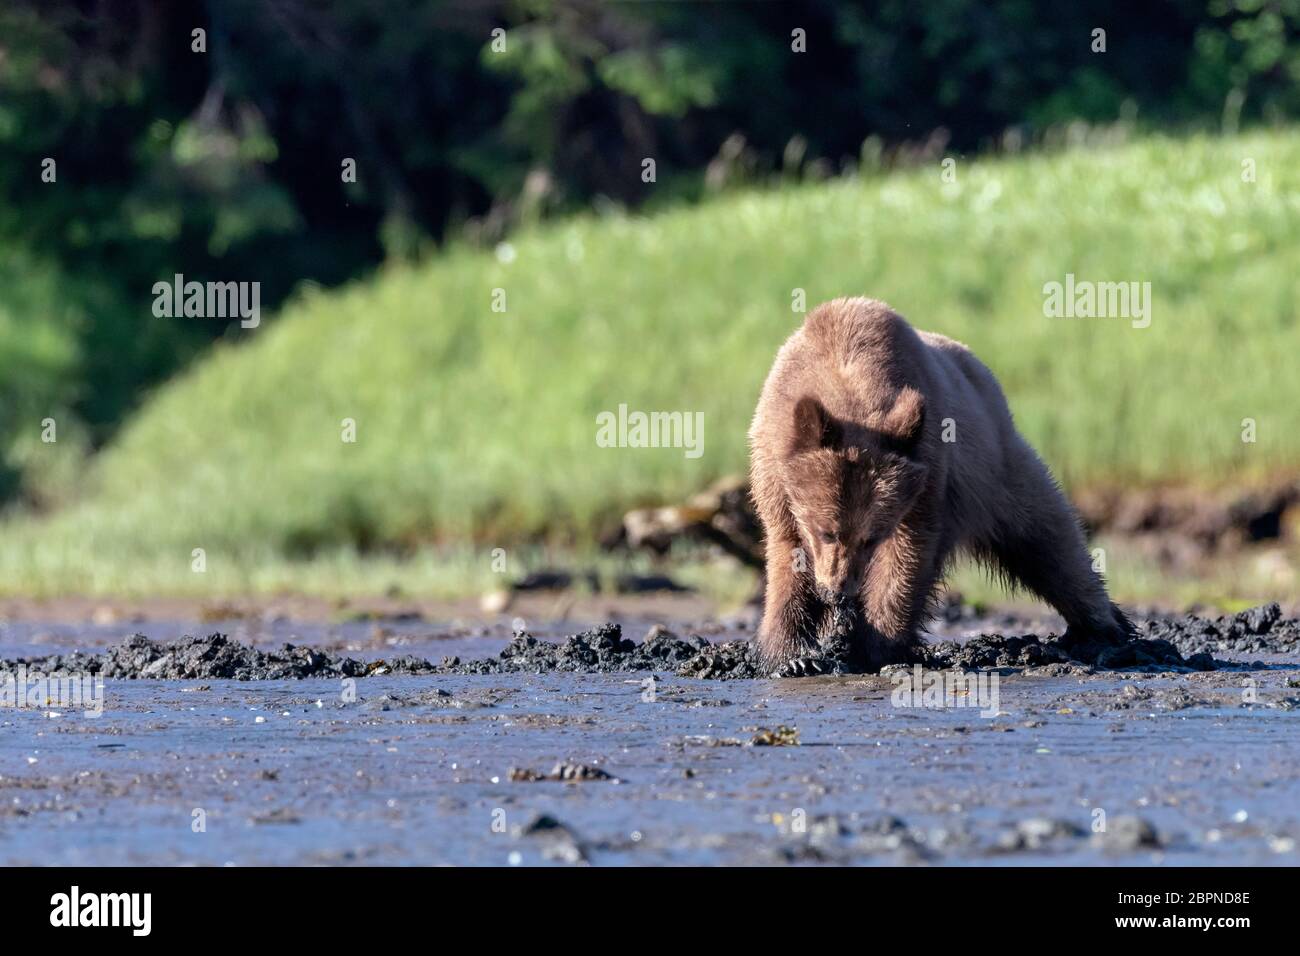 Grizzly bear eating the meat from a clam it dug up, Khutzeymateen Inlet, BC Stock Photo